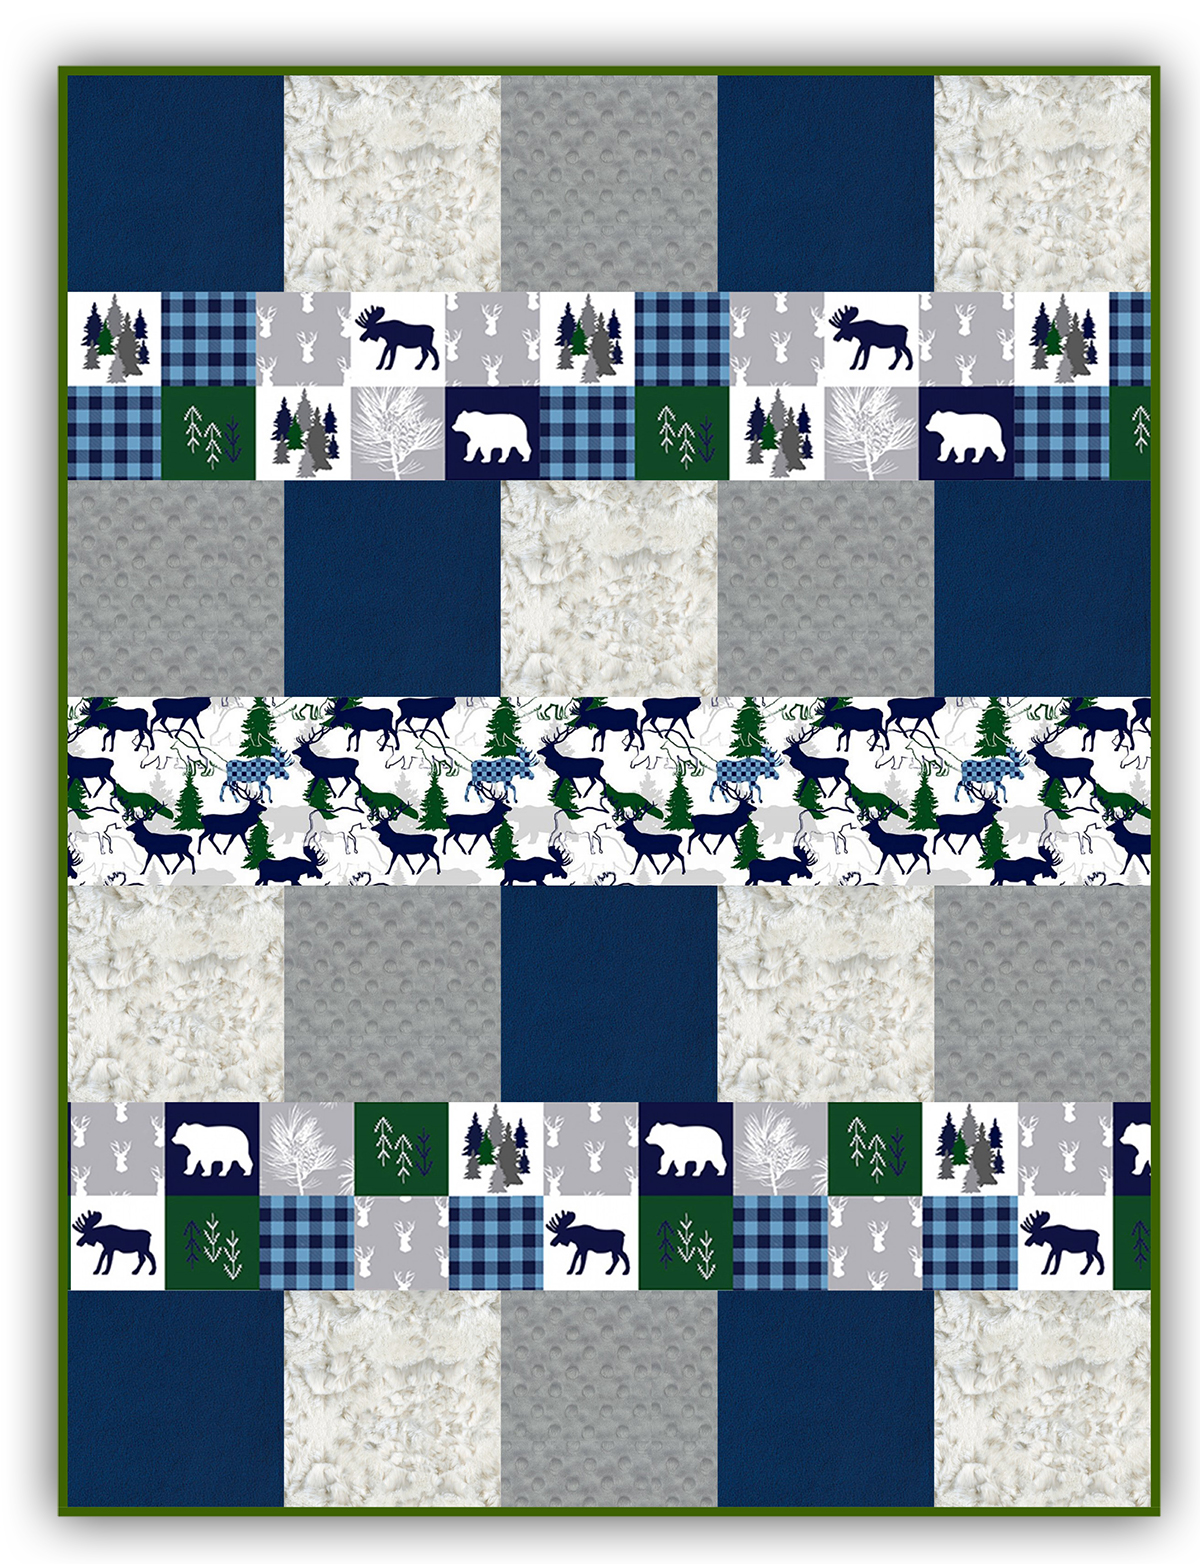 More Back in Stock! Exclusive Gorgeous Cabin Fever -Blue - Deluxe Minky  Quilt-As-You-Go Kit - Shannon Fabrics by Homespun Hearth Exclusive Design